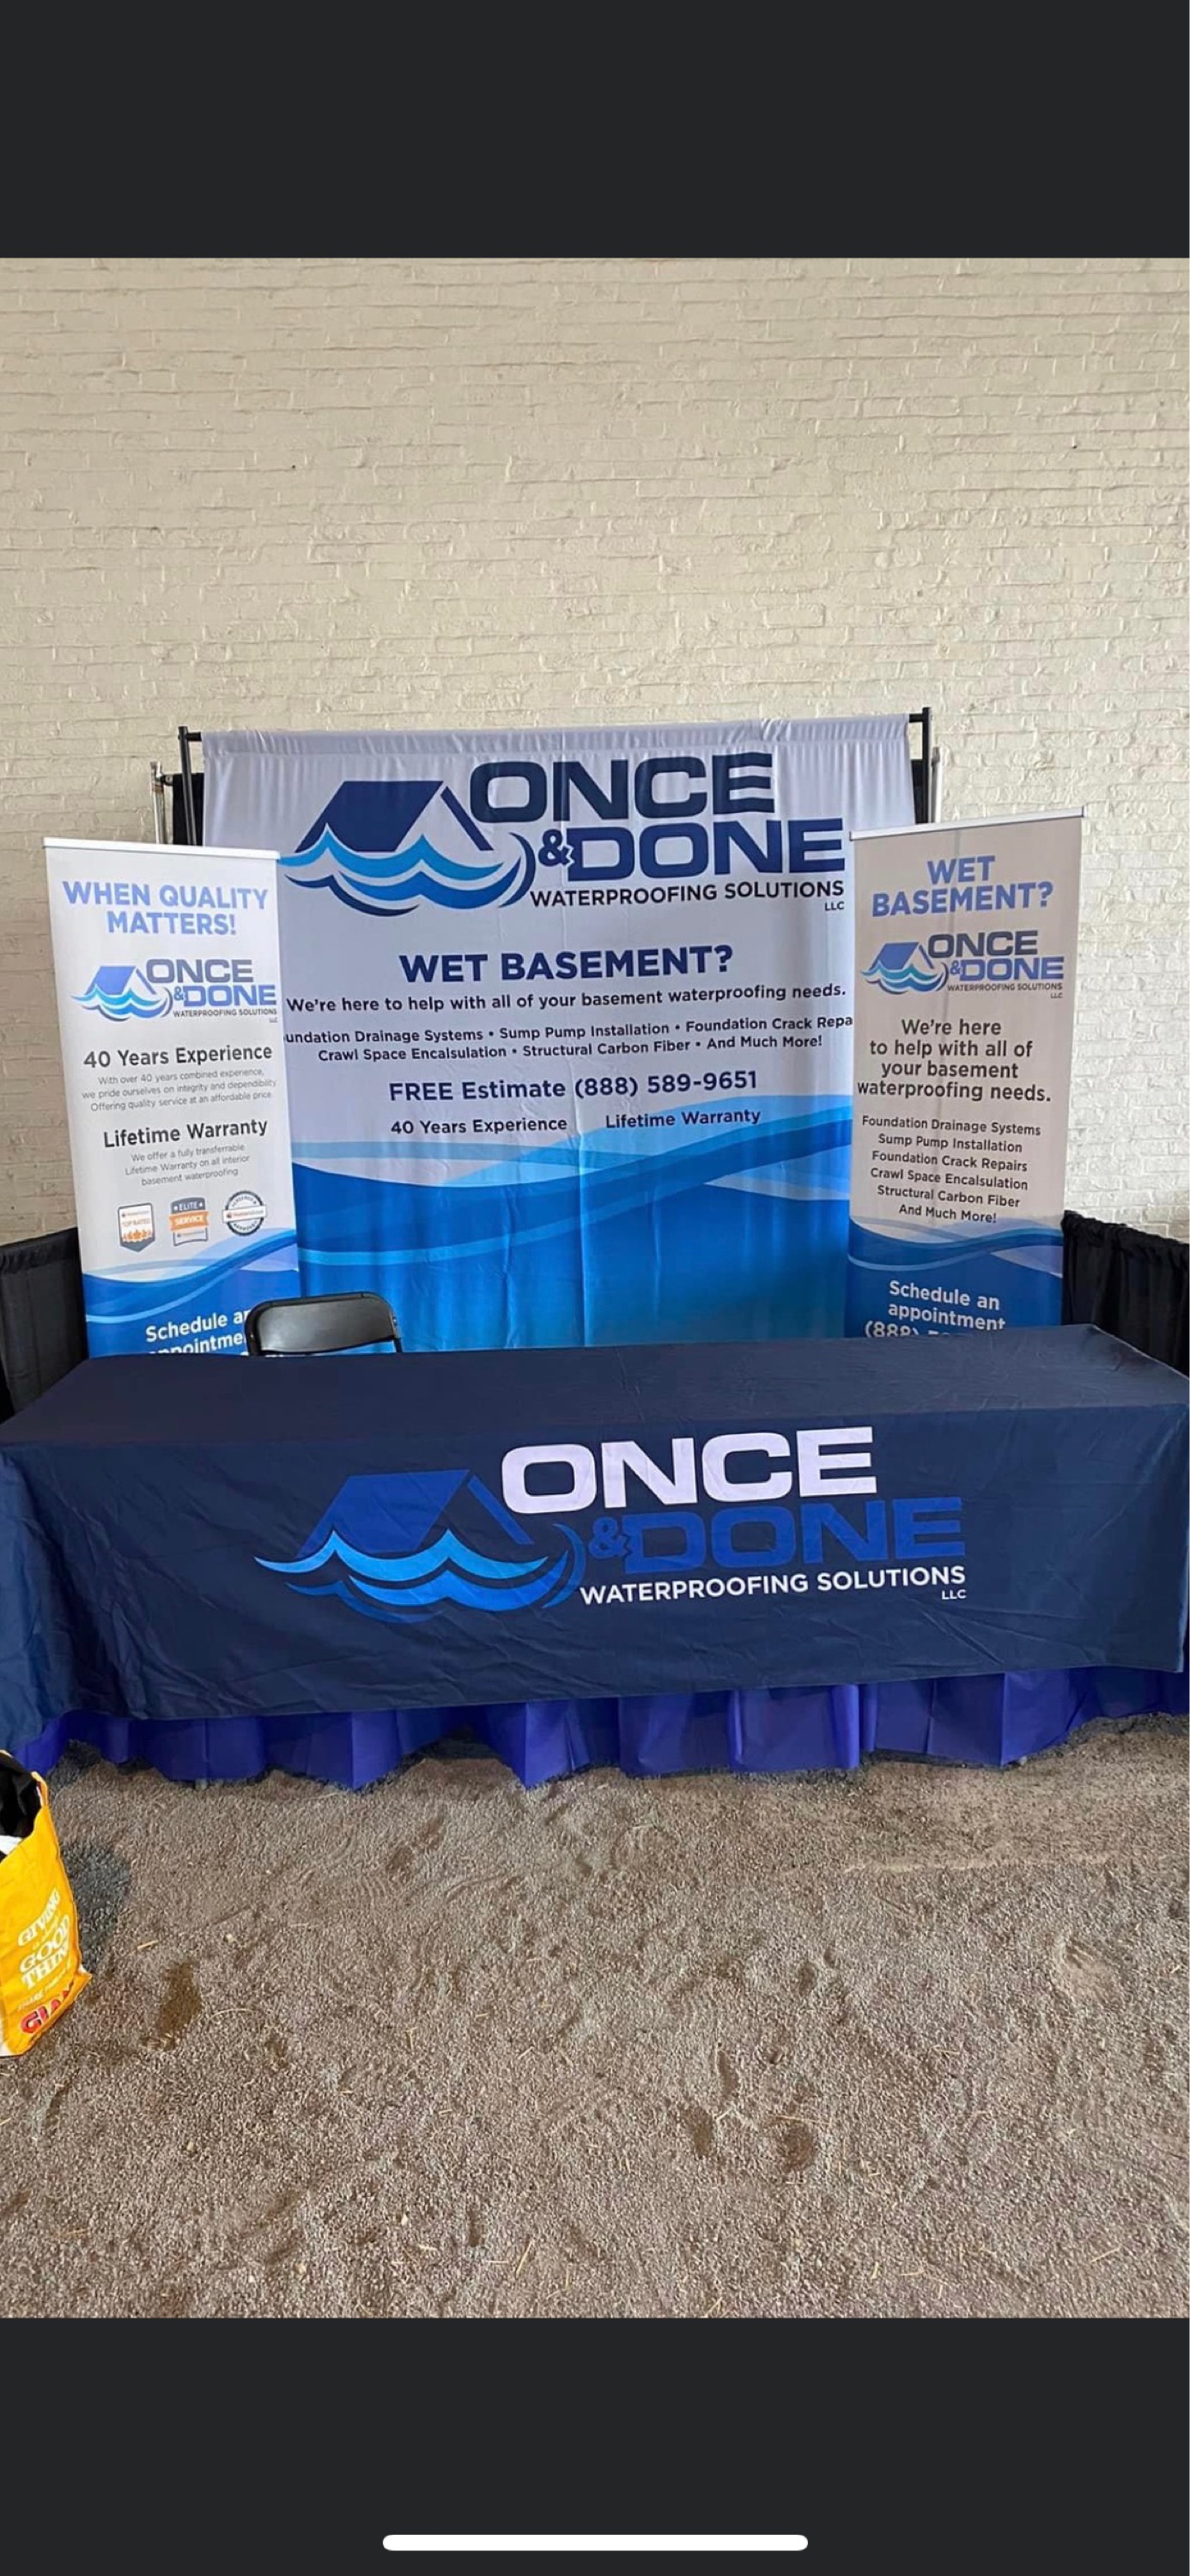 Once & Done Waterproofing Solutions, LLC Logo